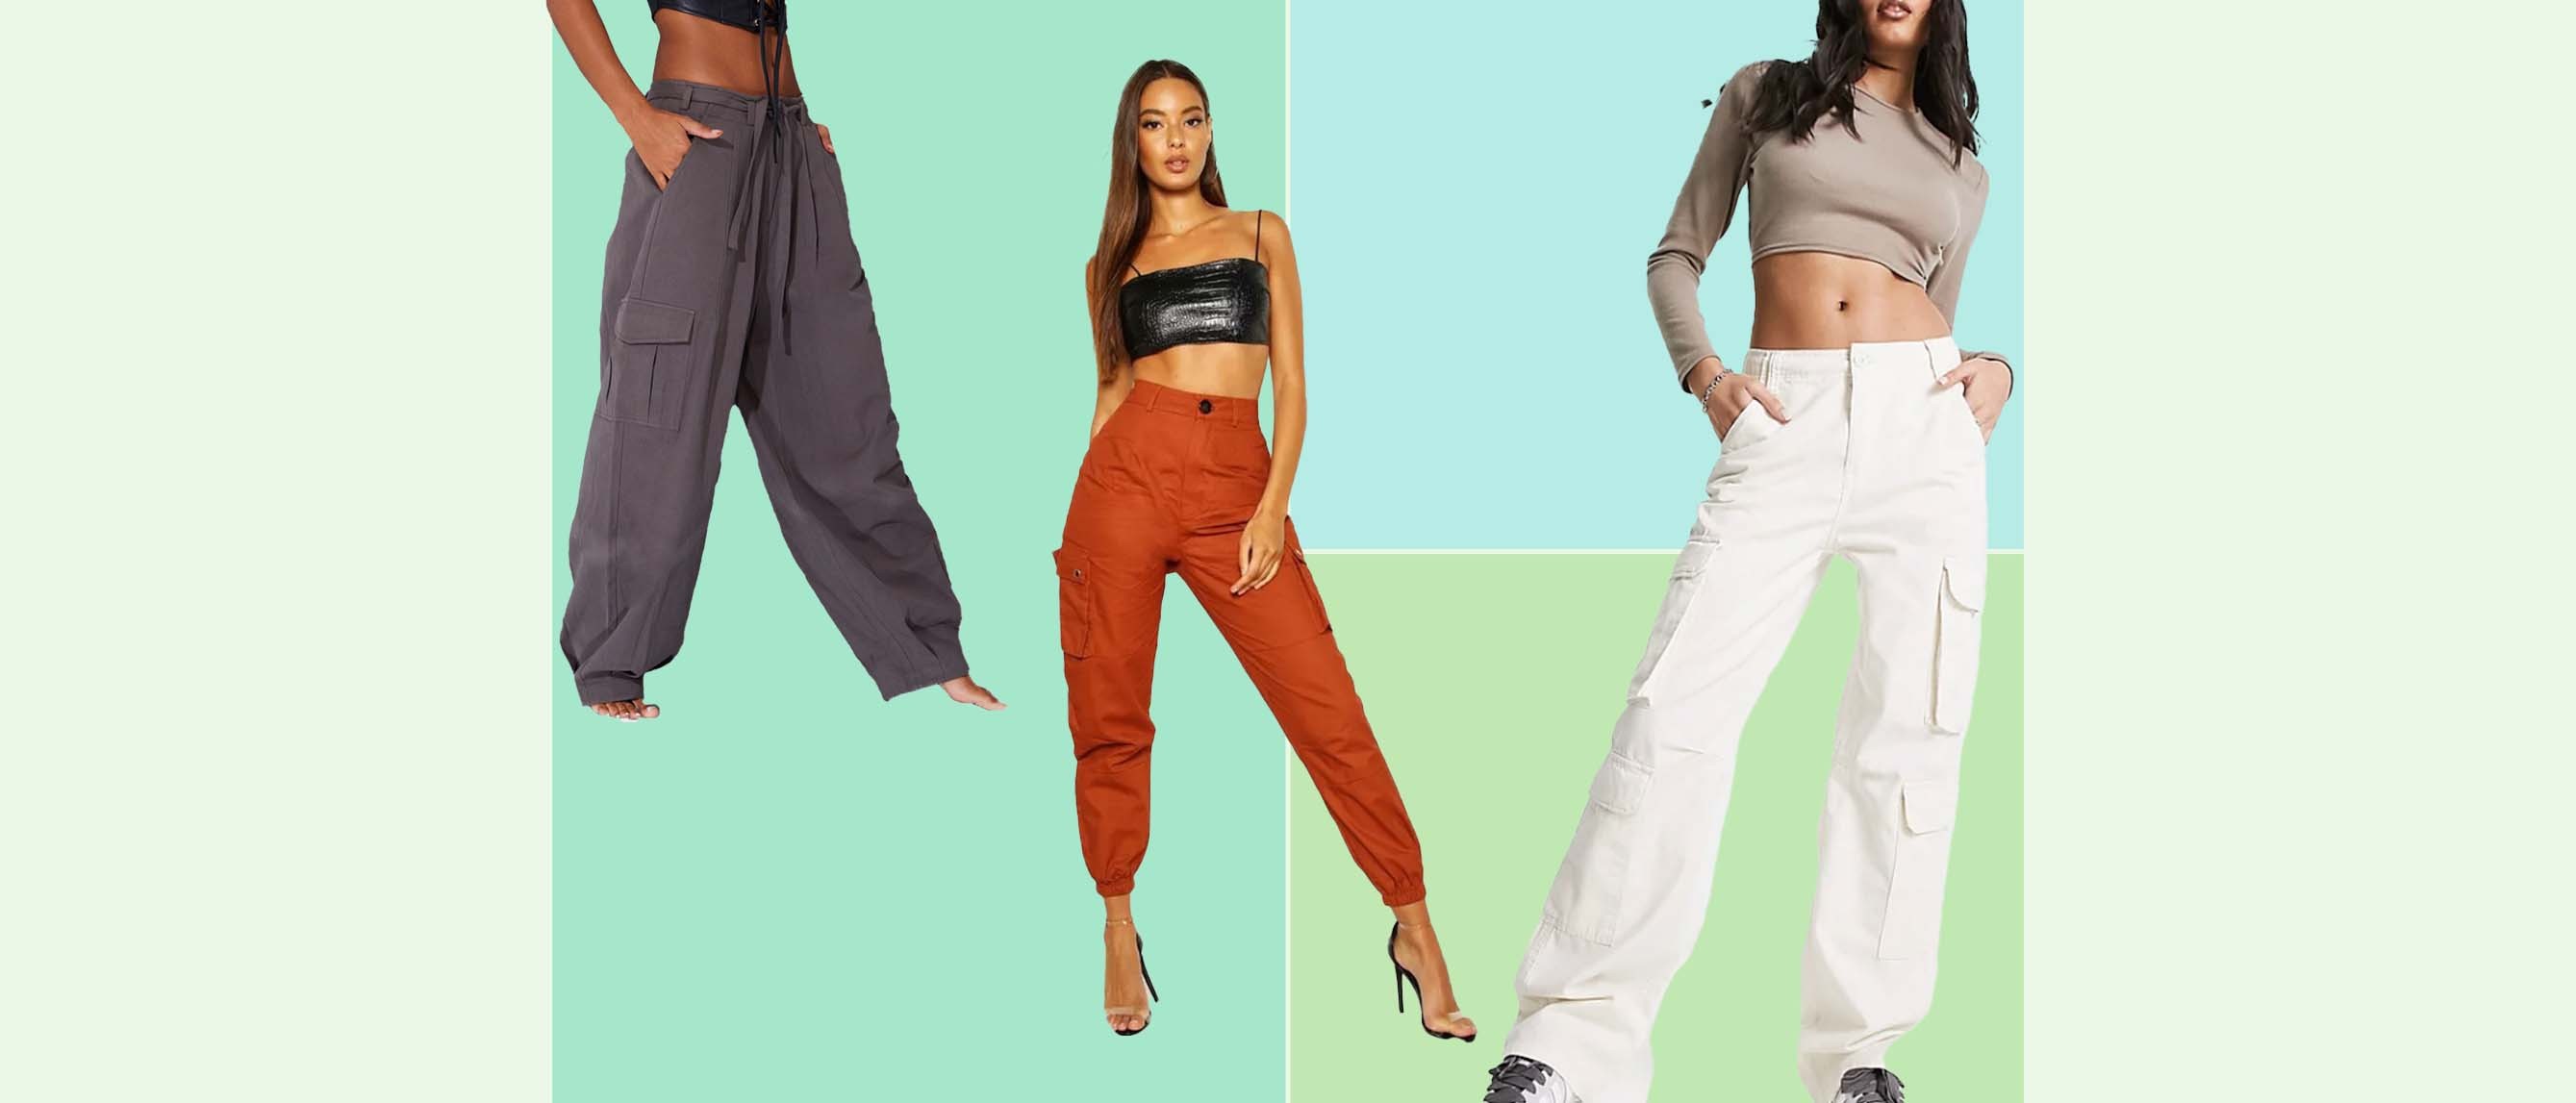 Cargo pants are back: Discover the best picks